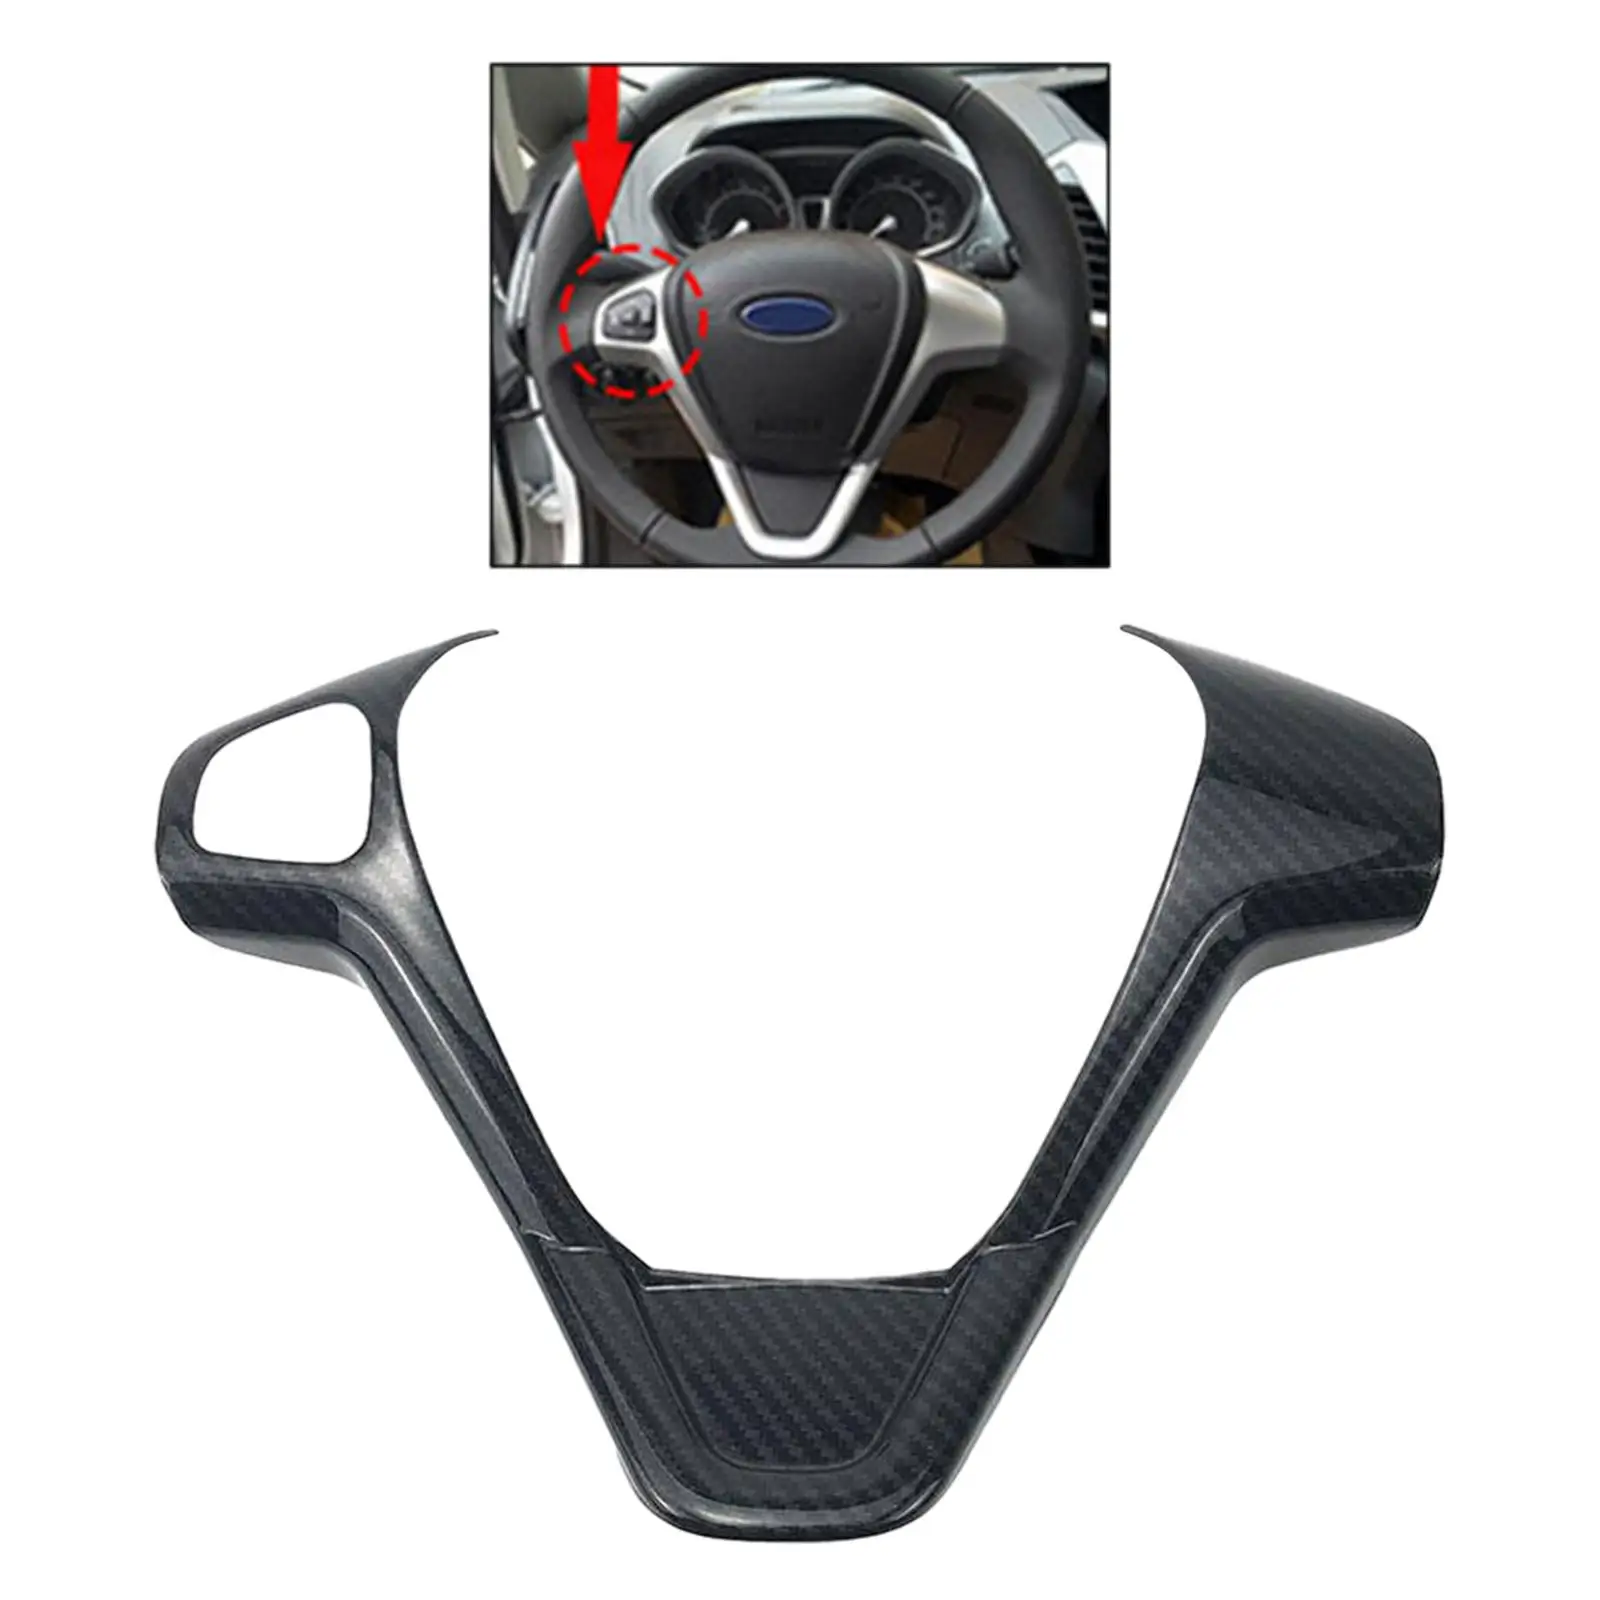 Car Steering Wheel Cover Carbon Fibre Effect Stable Car Interior Accessory for Ford Fiesta MK7 2009-2017 MK7.5 Facelift Men